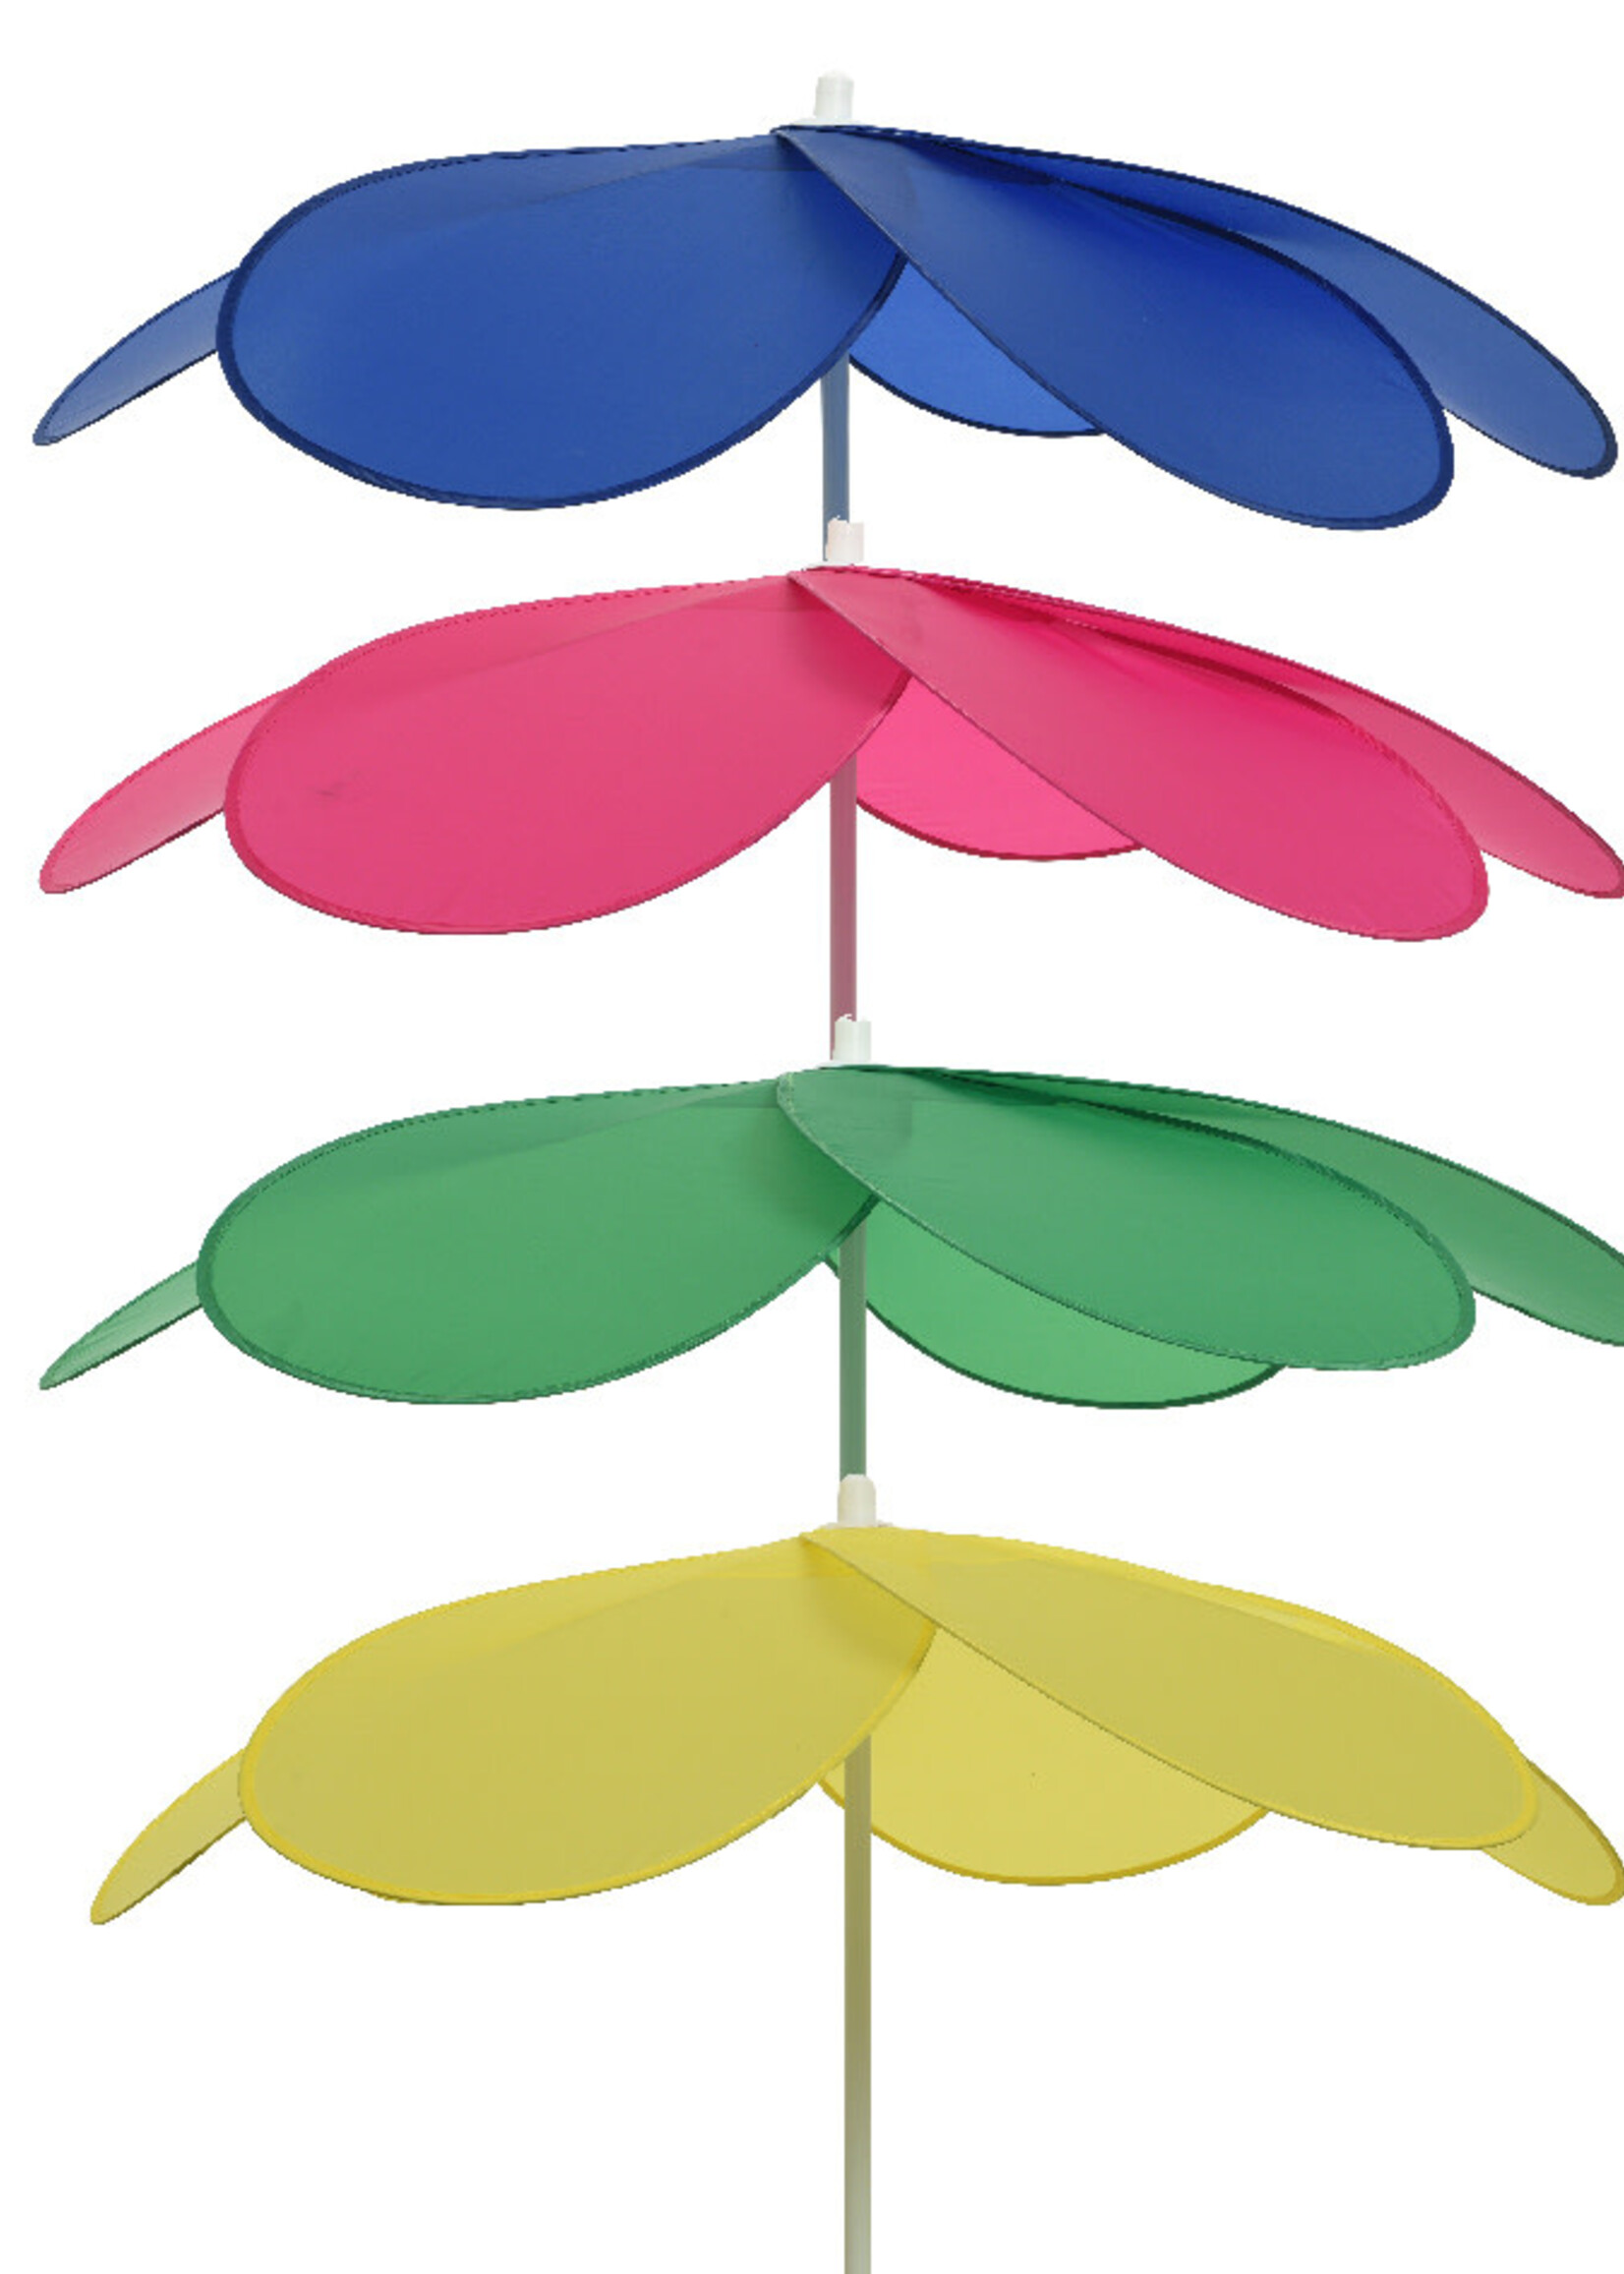 Decoris Fan Folding Colourful Parasol - Price is for one